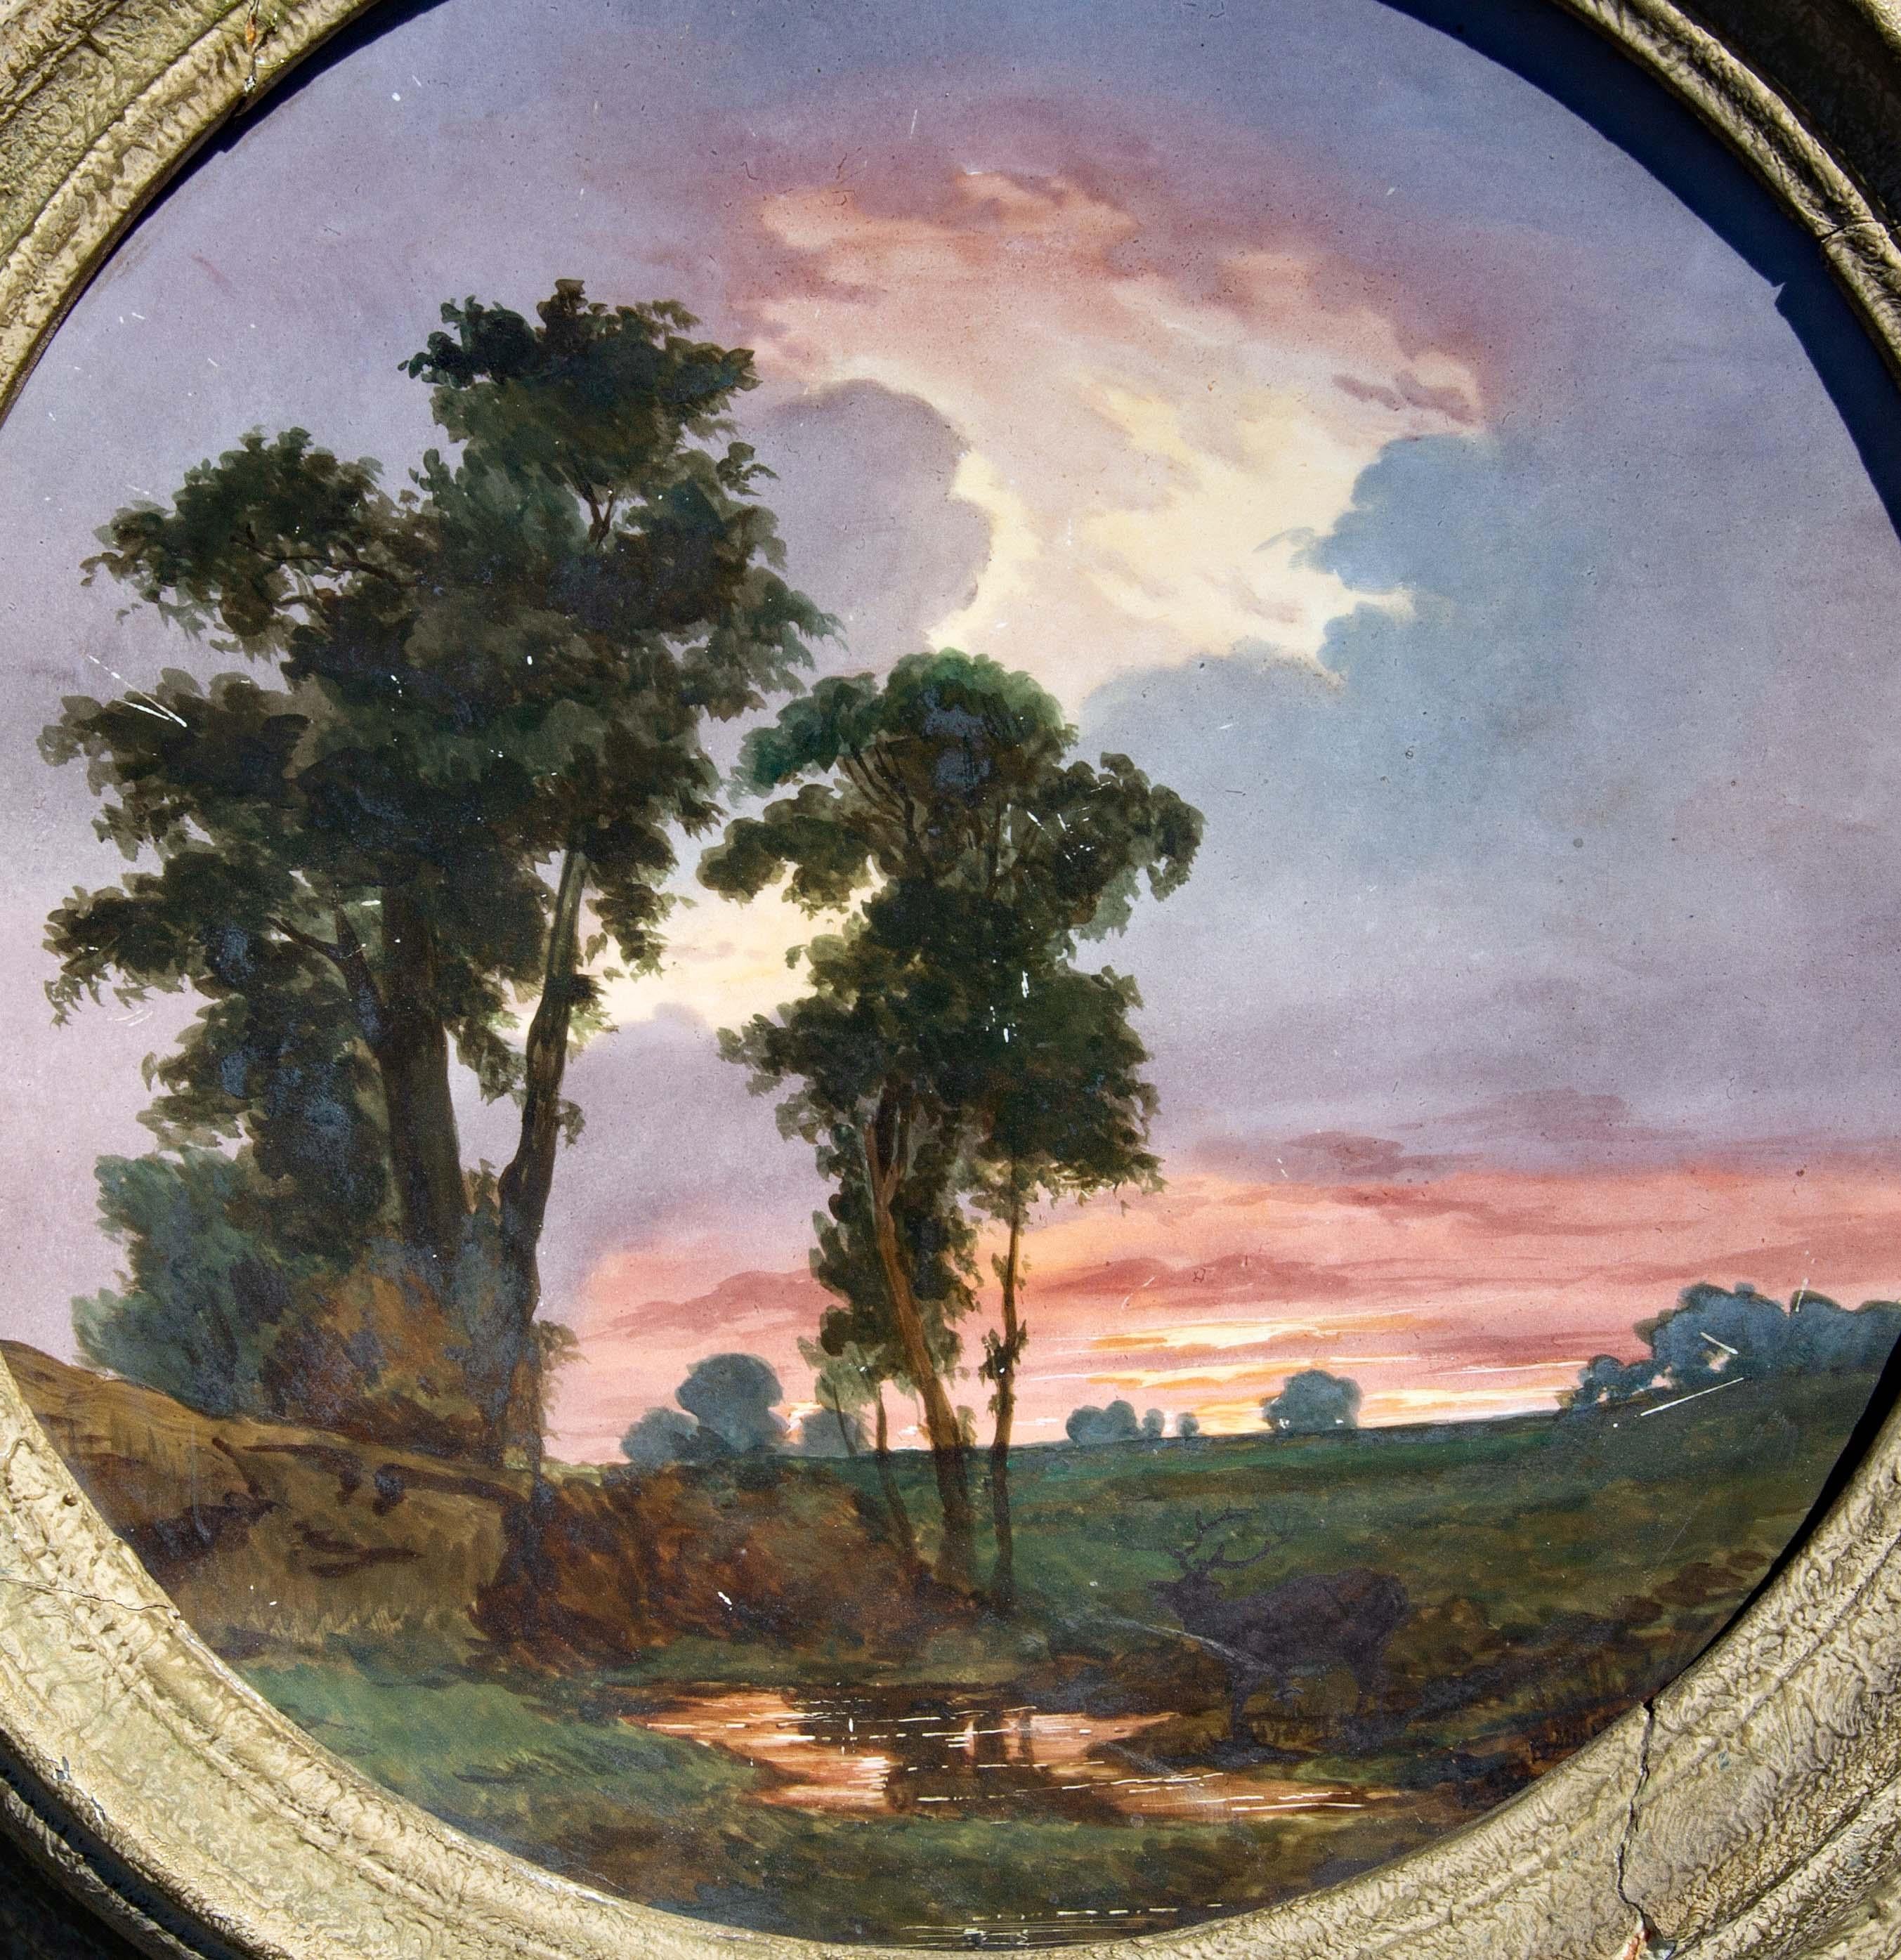 Barbizon Landscape Painting on French Porcelain Charger 19th Century by Millet For Sale 2